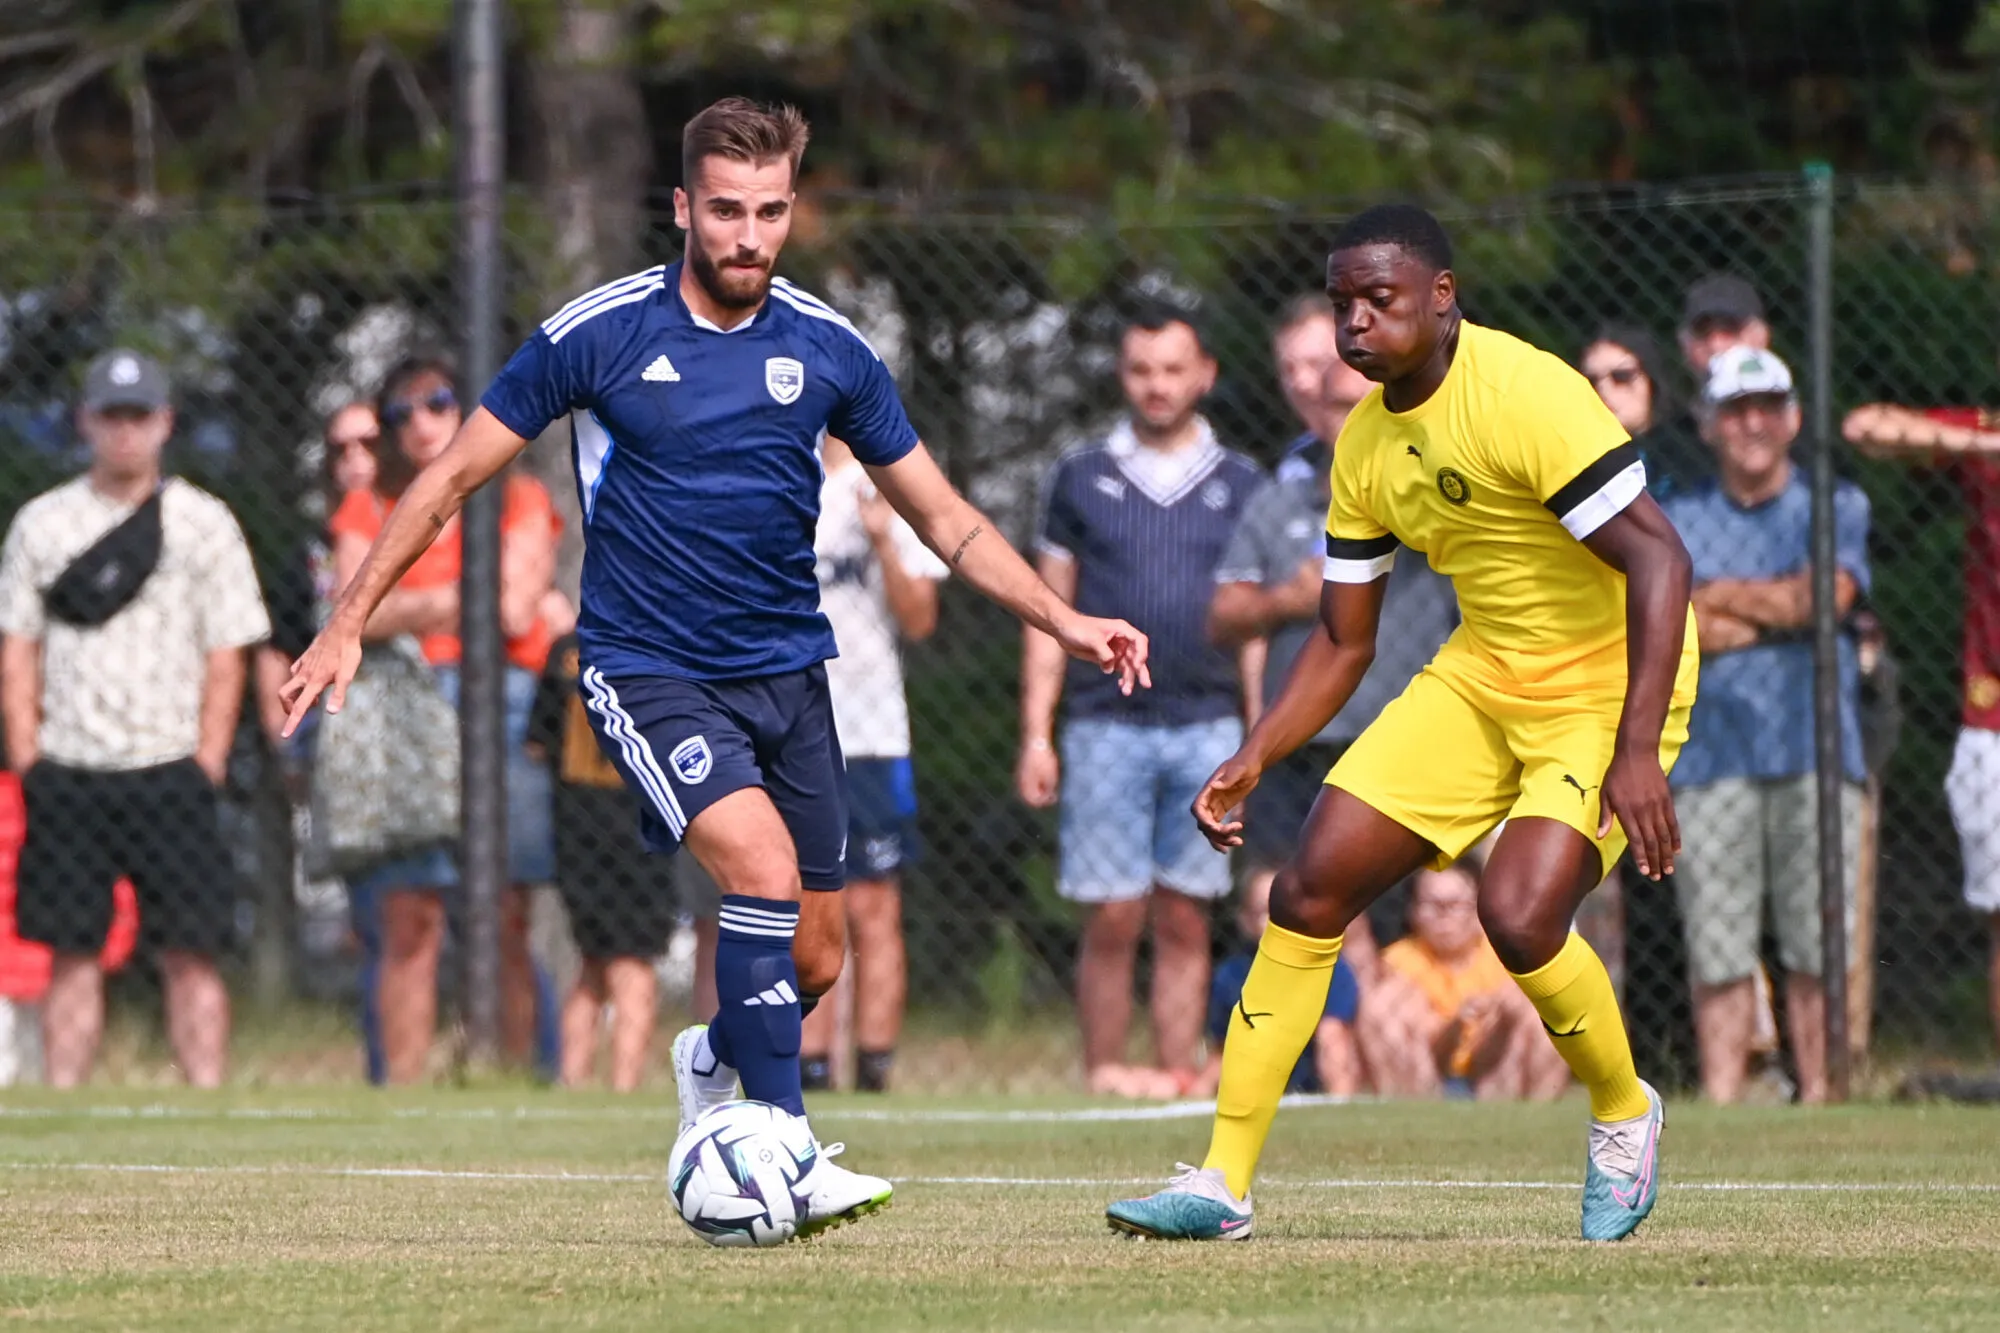 Gaetan WEISSBECK of Bordeaux during the friendly match between Girondins de Bordeaux and Pau FC on July 12, 2023 in La Teste-de-Buch, France. (Photo by Anthony Dibon/Icon Sport)